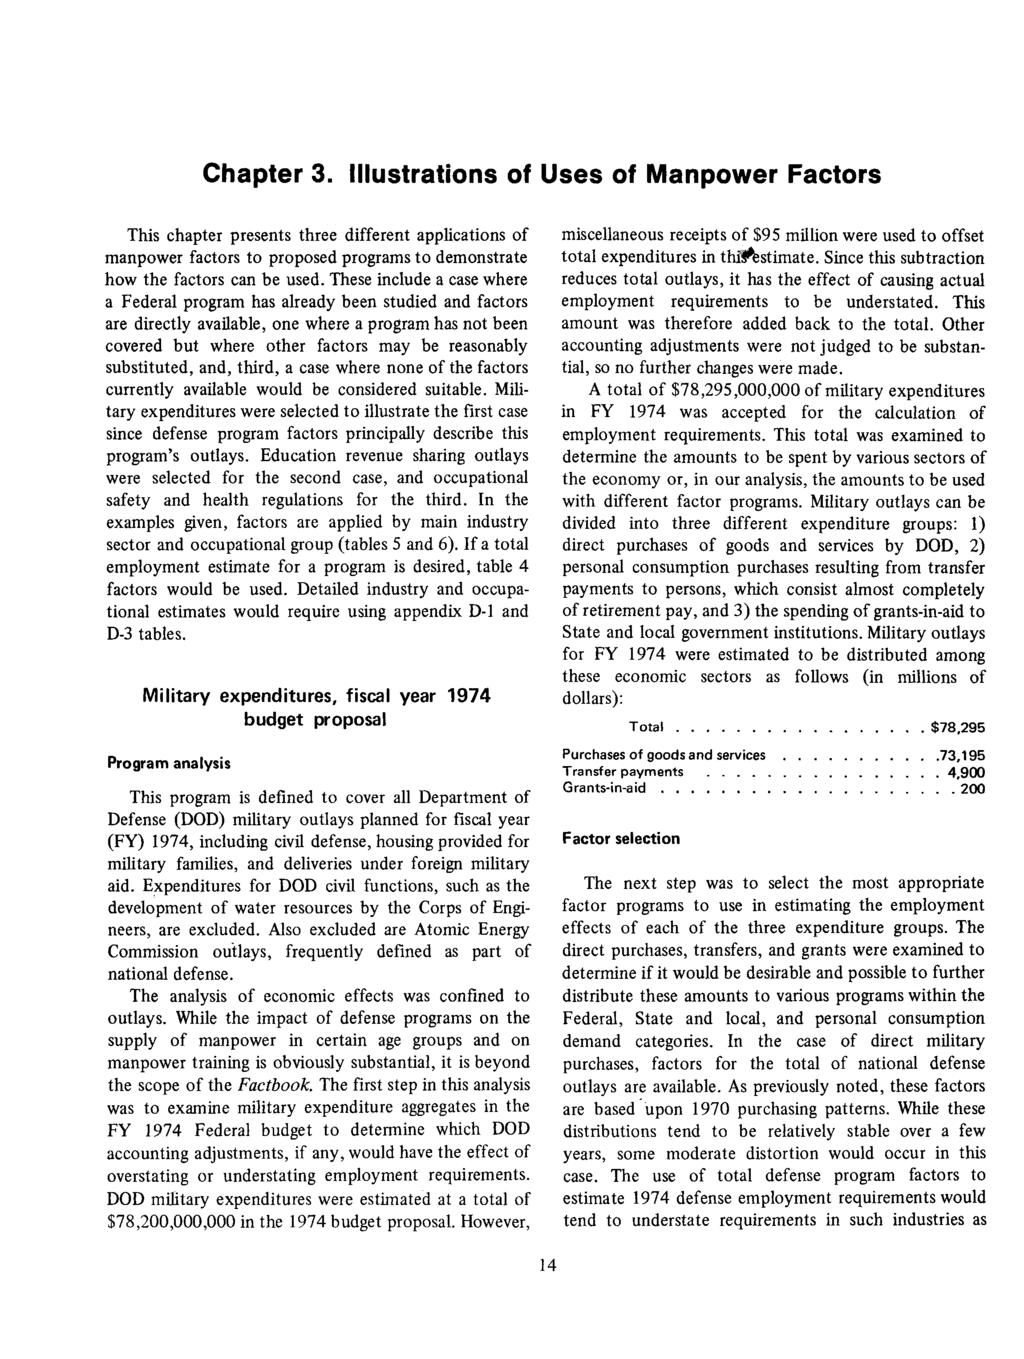 Chapter 3. Illustrations of Uses of Manpower Factors This chapter presents three different applications of manpower factors to proposed programs to demonstrate how the factors can be used.